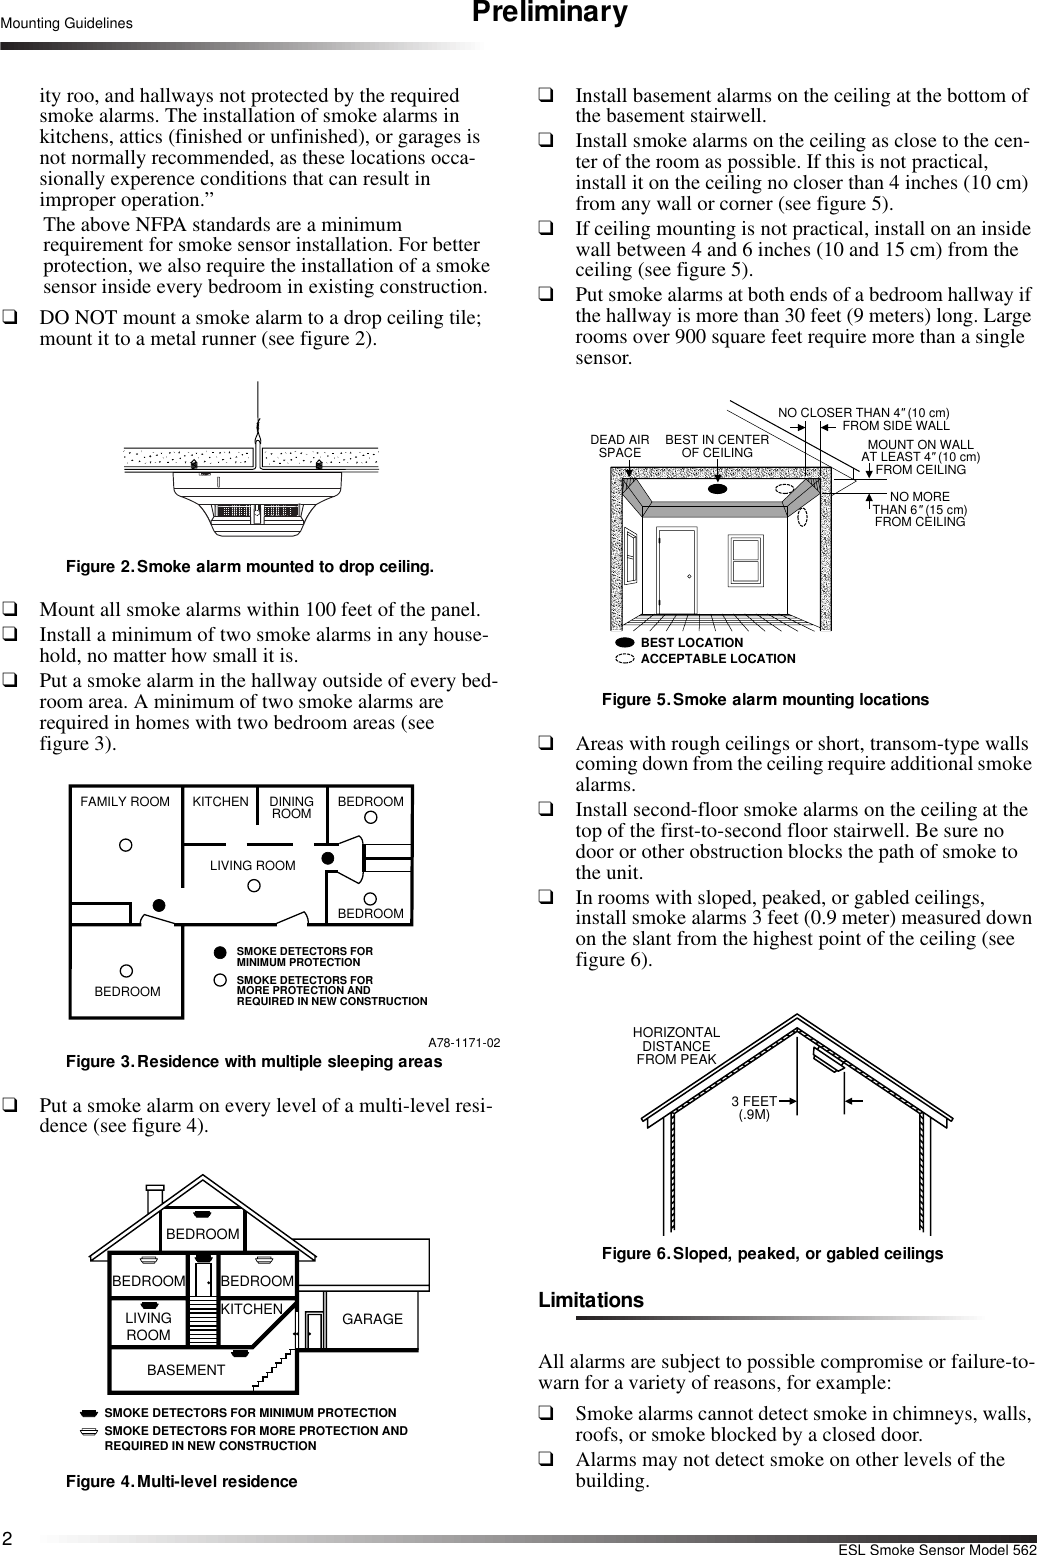 2ESL Smoke Sensor Model 562Mounting Guidelines Preliminaryity roo, and hallways not protected by the required smoke alarms. The installation of smoke alarms in kitchens, attics (finished or unfinished), or garages is not normally recommended, as these locations occa-sionally experence conditions that can result in improper operation.”The above NFPA standards are a minimum requirement for smoke sensor installation. For better protection, we also require the installation of a smoke sensor inside every bedroom in existing construction.❑DO NOT mount a smoke alarm to a drop ceiling tile; mount it to a metal runner (see figure 2).Figure 2. Smoke alarm mounted to drop ceiling.❑Mount all smoke alarms within 100 feet of the panel.❑Install a minimum of two smoke alarms in any house-hold, no matter how small it is.❑Put a smoke alarm in the hallway outside of every bed-room area. A minimum of two smoke alarms are required in homes with two bedroom areas (see figure 3).A78-1171-02Figure 3. Residence with multiple sleeping areas❑Put a smoke alarm on every level of a multi-level resi-dence (see figure 4).Figure 4.Multi-level residence❑Install basement alarms on the ceiling at the bottom of the basement stairwell.❑Install smoke alarms on the ceiling as close to the cen-ter of the room as possible. If this is not practical, install it on the ceiling no closer than 4 inches (10 cm) from any wall or corner (see figure 5).❑If ceiling mounting is not practical, install on an inside wall between 4 and 6 inches (10 and 15 cm) from the ceiling (see figure 5).❑Put smoke alarms at both ends of a bedroom hallway if the hallway is more than 30 feet (9 meters) long. Large rooms over 900 square feet require more than a single sensor.Figure 5. Smoke alarm mounting locations❑Areas with rough ceilings or short, transom-type walls coming down from the ceiling require additional smoke alarms.❑Install second-floor smoke alarms on the ceiling at the top of the first-to-second floor stairwell. Be sure no door or other obstruction blocks the path of smoke to the unit.❑In rooms with sloped, peaked, or gabled ceilings, install smoke alarms 3 feet (0.9 meter) measured down on the slant from the highest point of the ceiling (see figure 6).Figure 6. Sloped, peaked, or gabled ceilingsLimitationsAll alarms are subject to possible compromise or failure-to-warn for a variety of reasons, for example:❑Smoke alarms cannot detect smoke in chimneys, walls, roofs, or smoke blocked by a closed door.❑Alarms may not detect smoke on other levels of the building.BEDROOMSMOKE DETECTORS FORMINIMUM PROTECTIONSMOKE DETECTORS FORMORE PROTECTION AND REQUIRED IN NEW CONSTRUCTIONBEDROOMBEDROOMLIVING ROOMDININGROOMKITCHENFAMILY ROOMBEDROOMBEDROOM BEDROOMLIVINGROOMKITCHENBASEMENTGARAGESMOKE DETECTORS FOR MINIMUM PROTECTIONSMOKE DETECTORS FOR MORE PROTECTION ANDREQUIRED IN NEW CONSTRUCTIONBEST LOCATIONACCEPTABLE LOCATIONDEAD AIRSPACE BEST IN CENTEROF CEILINGNO CLOSER THAN 4&quot; (10 cm)FROM SIDE WALLMOUNT ON WALLAT LEAST 4&quot; (10 cm)FROM CEILINGNO MORETHAN 6&quot; (15 cm)FROM CEILINGHORIZONTALDISTANCEFROM PEAK3 FEET(.9M)